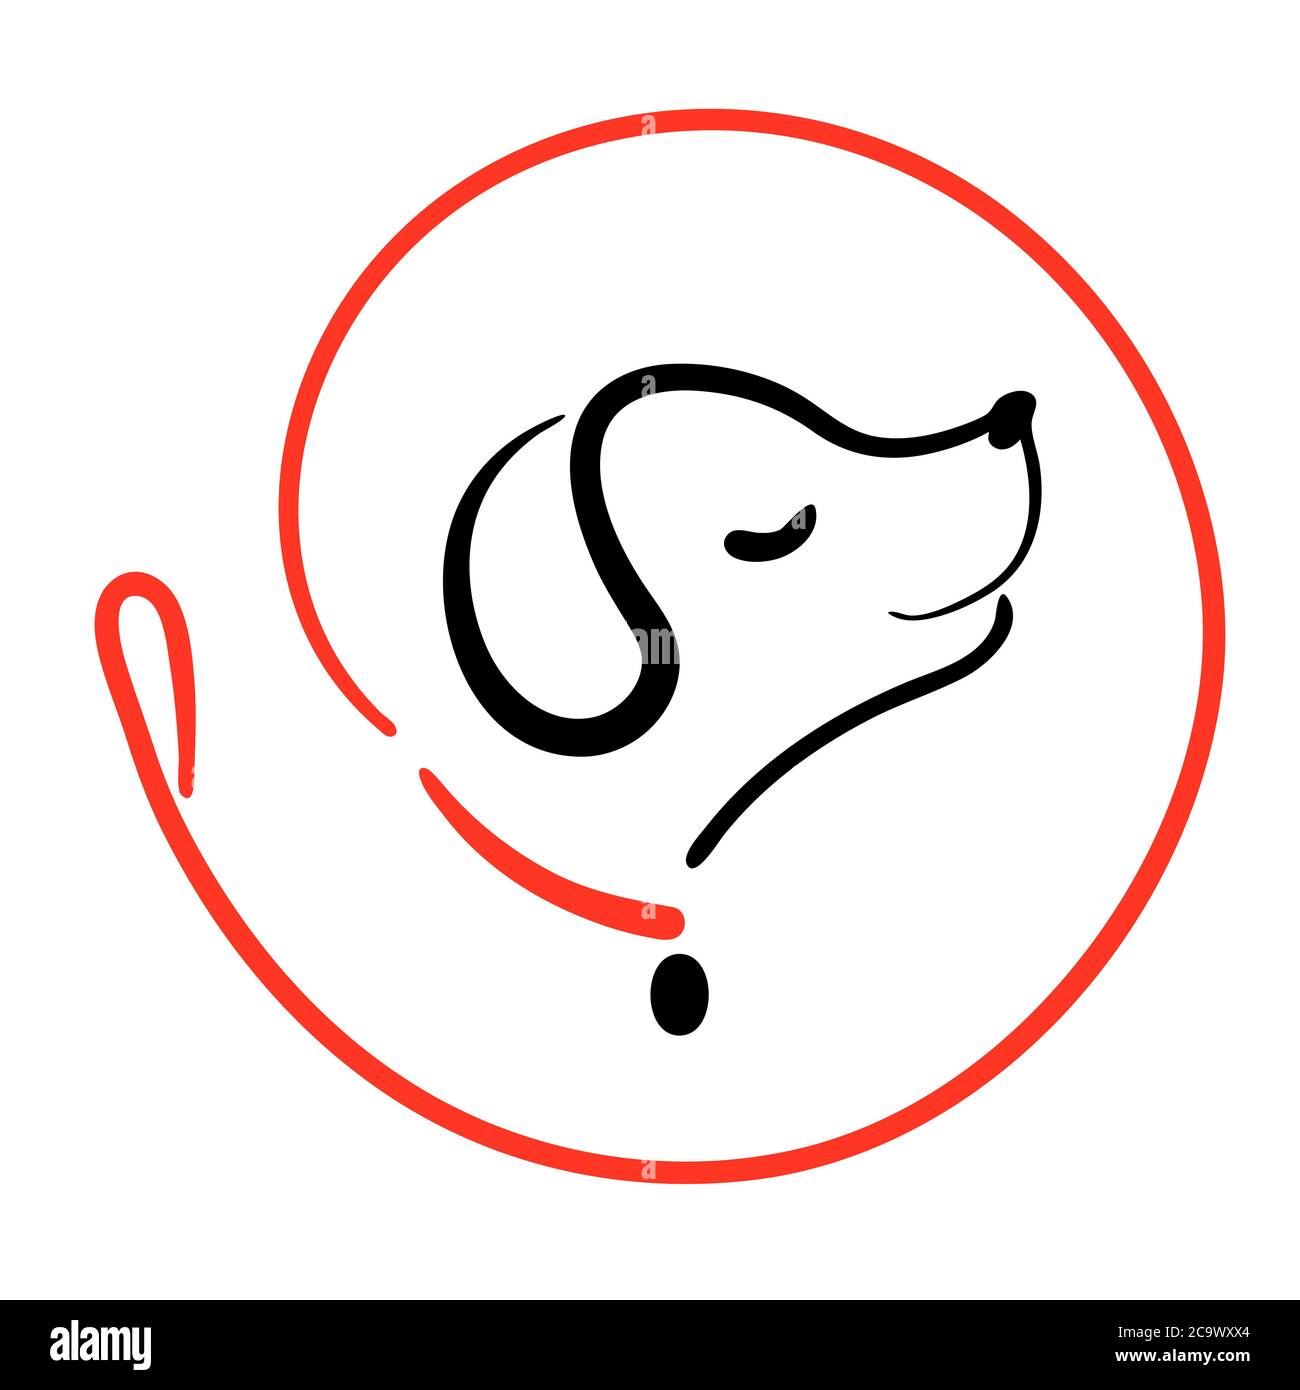 Dog walking service logo in line style on round from leash. Happy puppy training icon. Walk pet symbol in black red vector outline illustration. Simple Cartoon animal logotype. Stock Vector